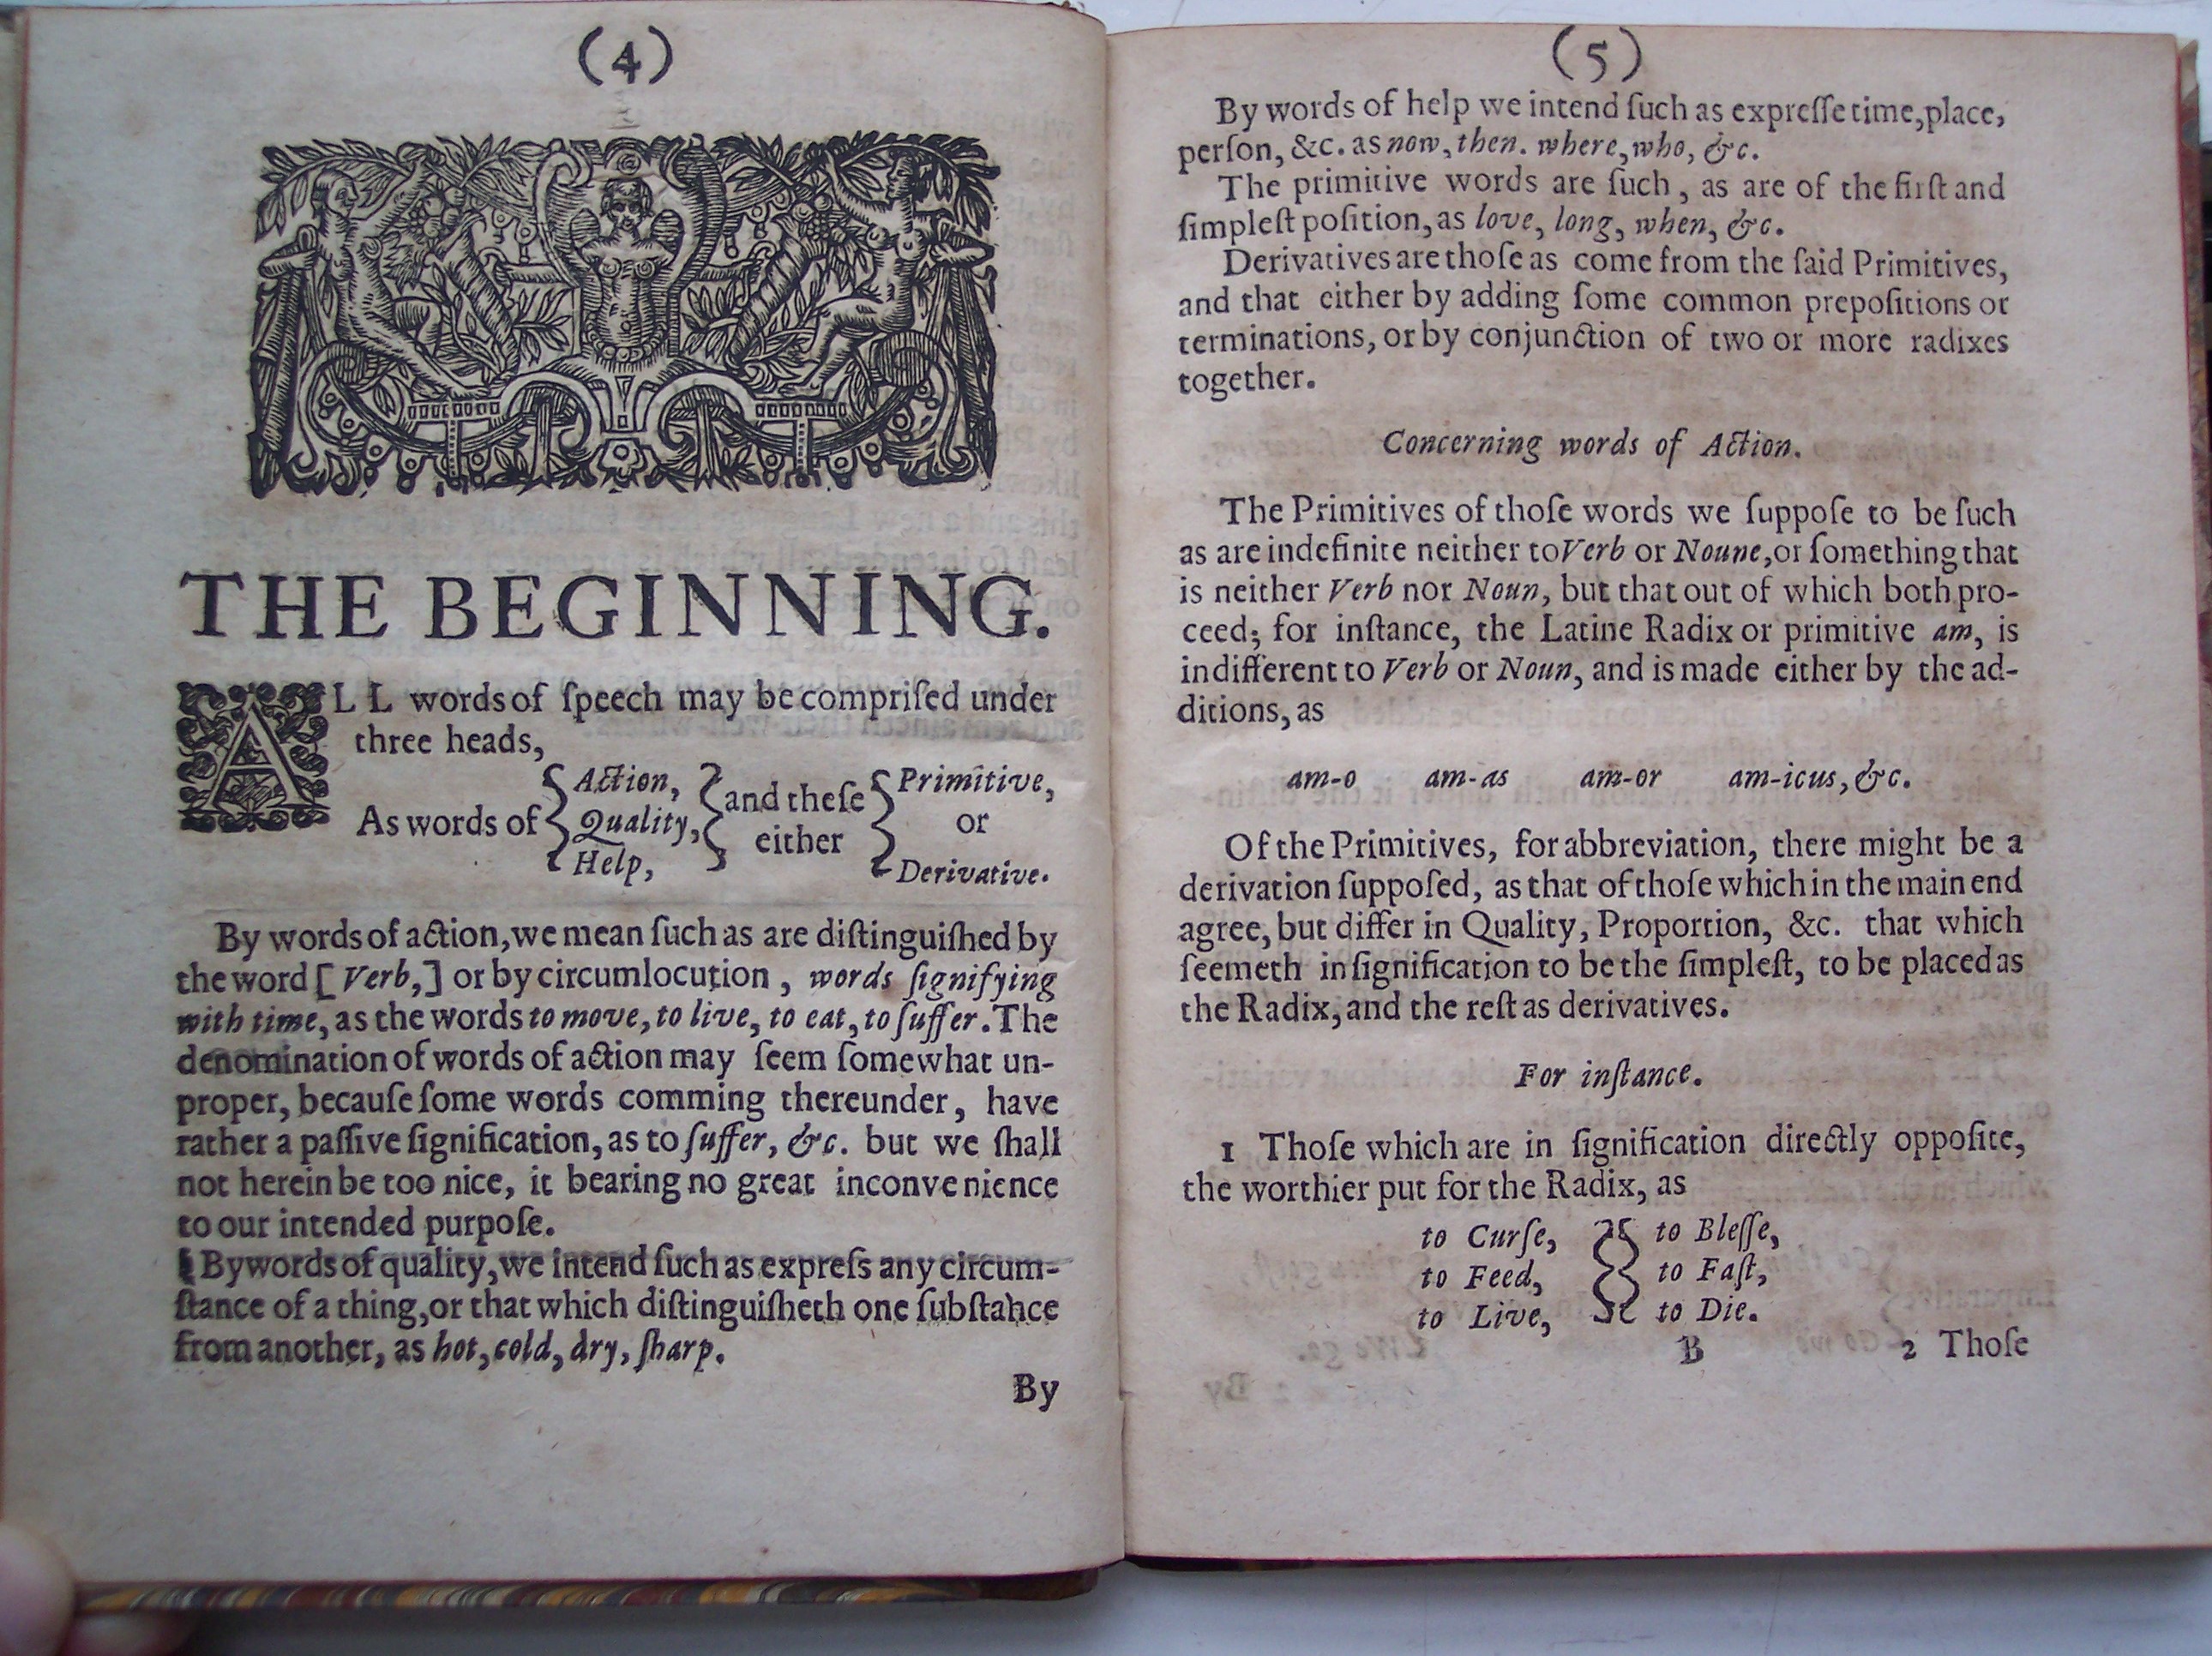 BT3.206.24(1), pp. 4-5, Francis Lodwick’s The ground-work, or foundation laid, (or so intended) for the framing of a new perfect language (1652) 